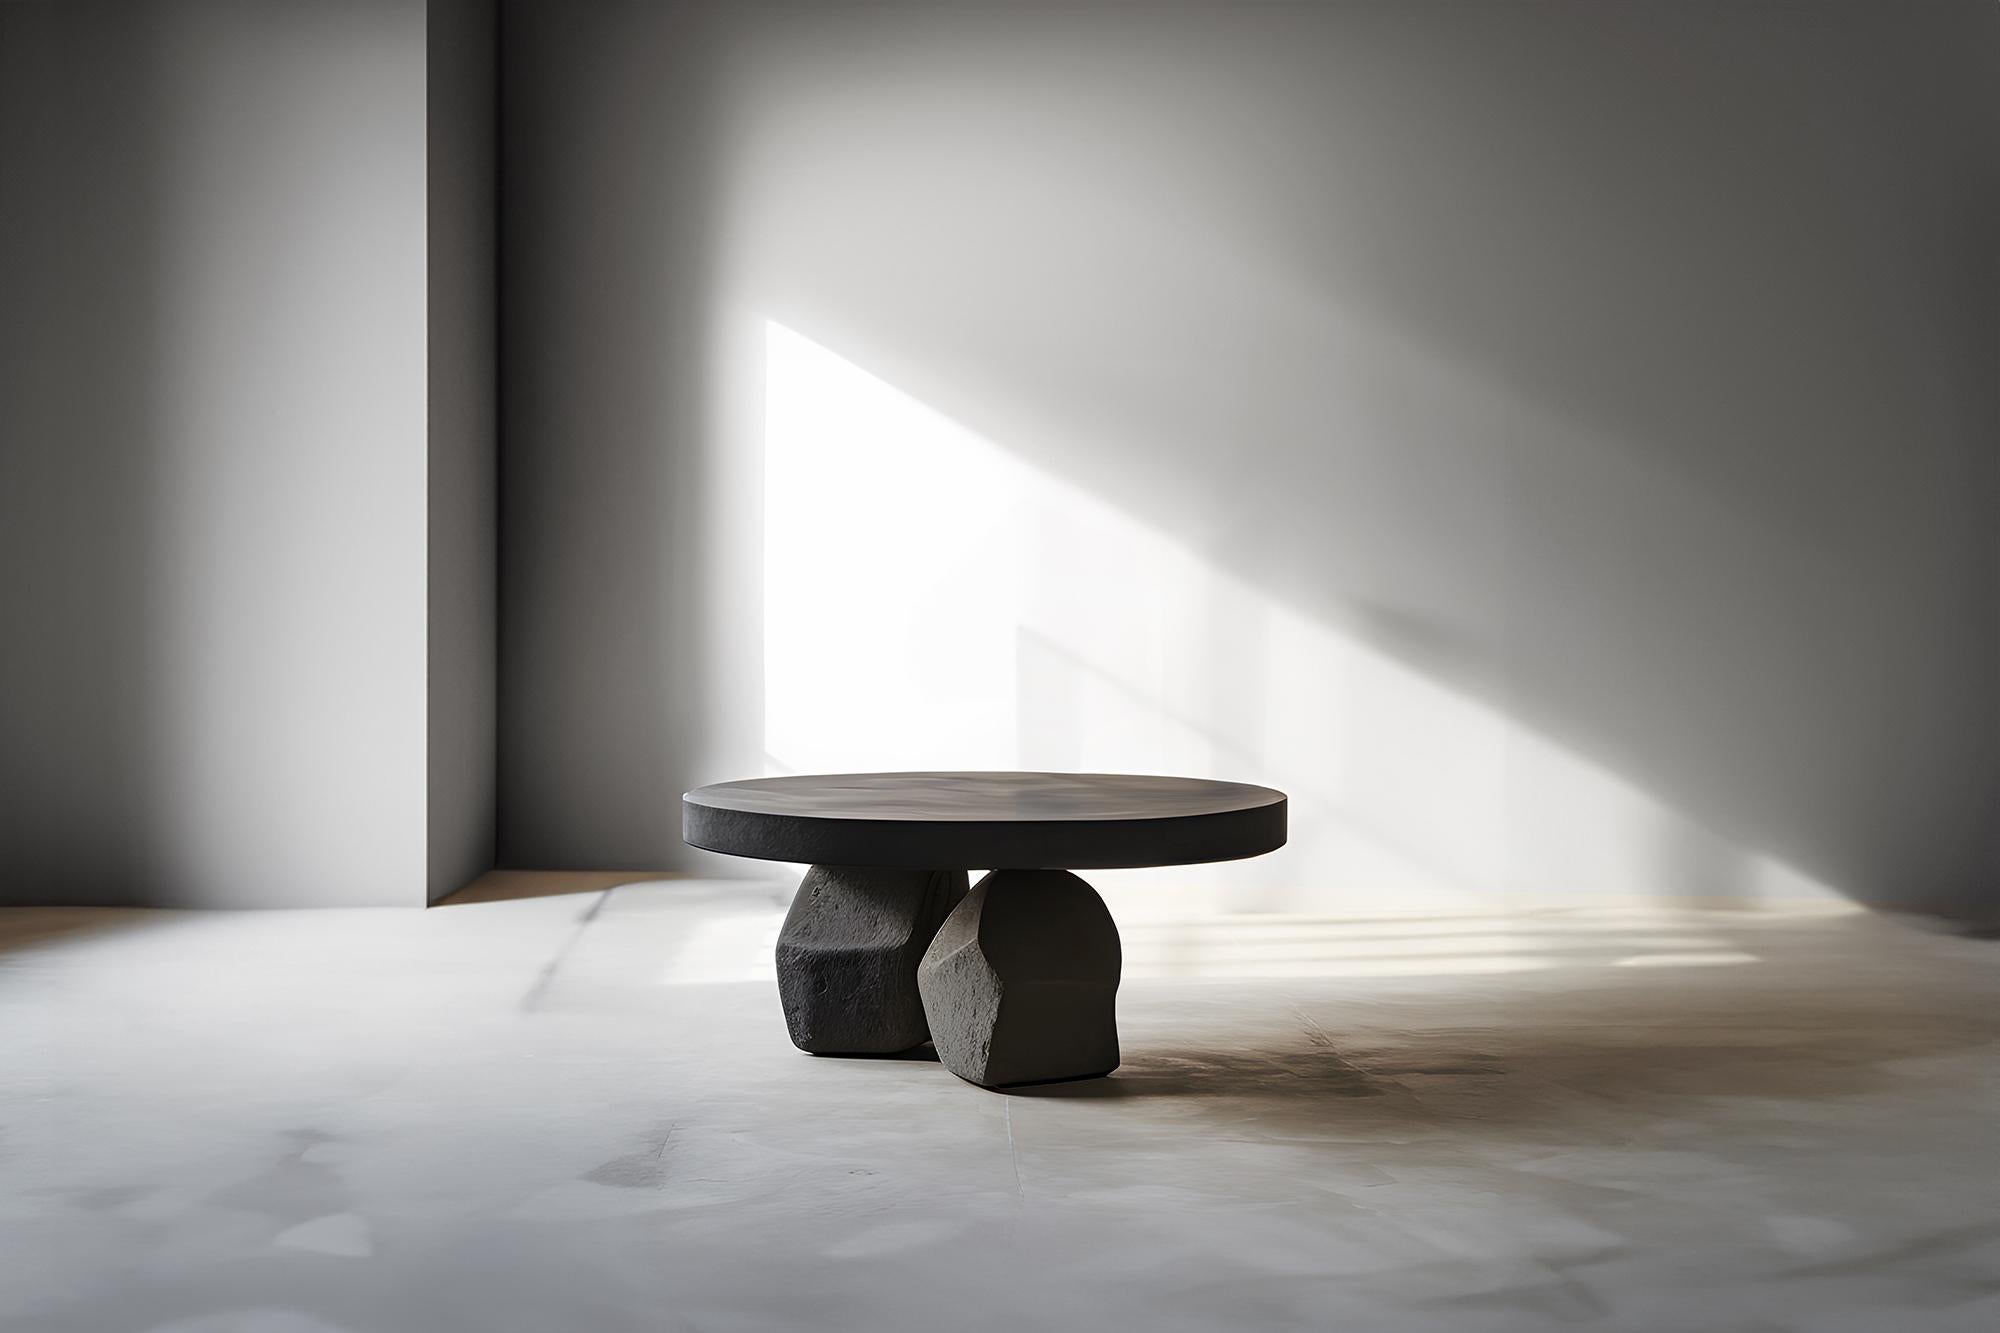 Black Tinted Round Coffee Table - Bold Silhouette Fundamenta 46 by NONO


Sculptural coffee table made of solid wood with a natural water-based or black tinted finish. Due to the nature of the production process, each piece may vary in grain,